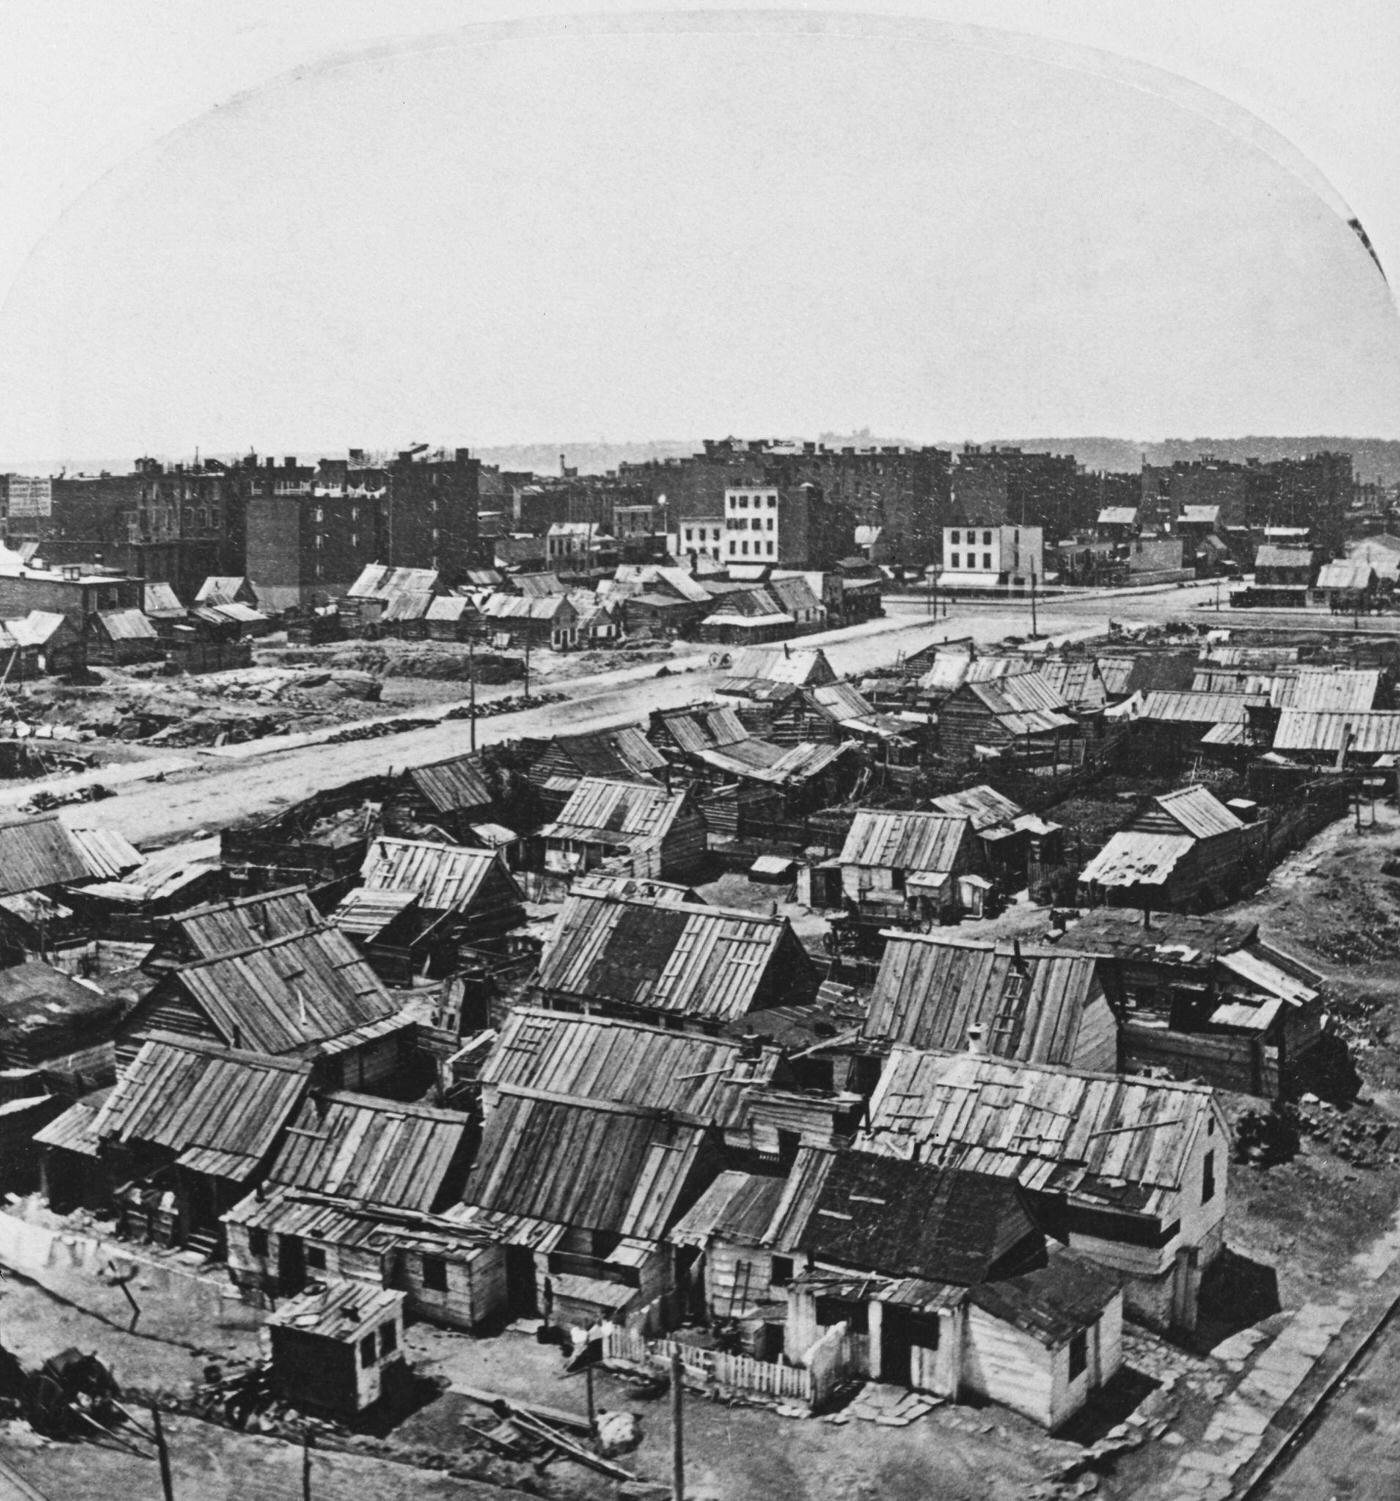 High Angle View Of Slum Dwellings On Eighth Avenue, West Side Of Manhattan, 1885